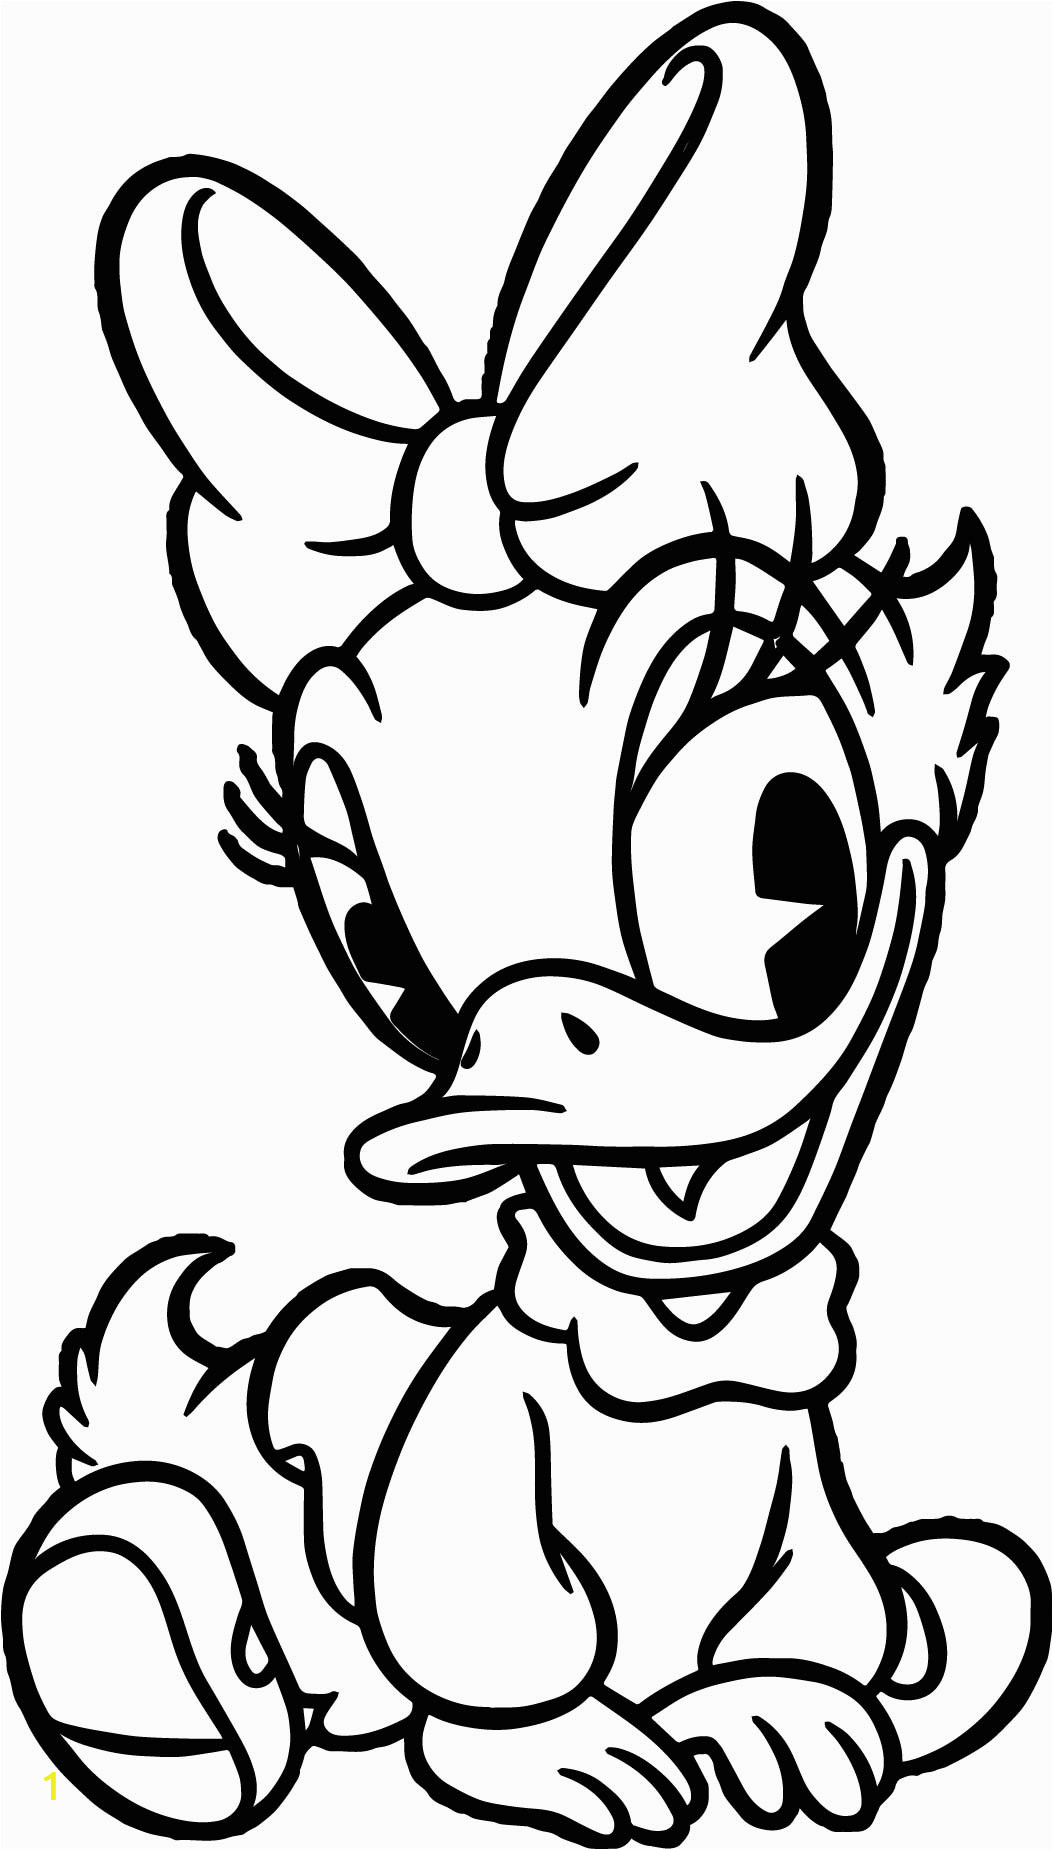 minnie mouse and daisy duck coloring pages